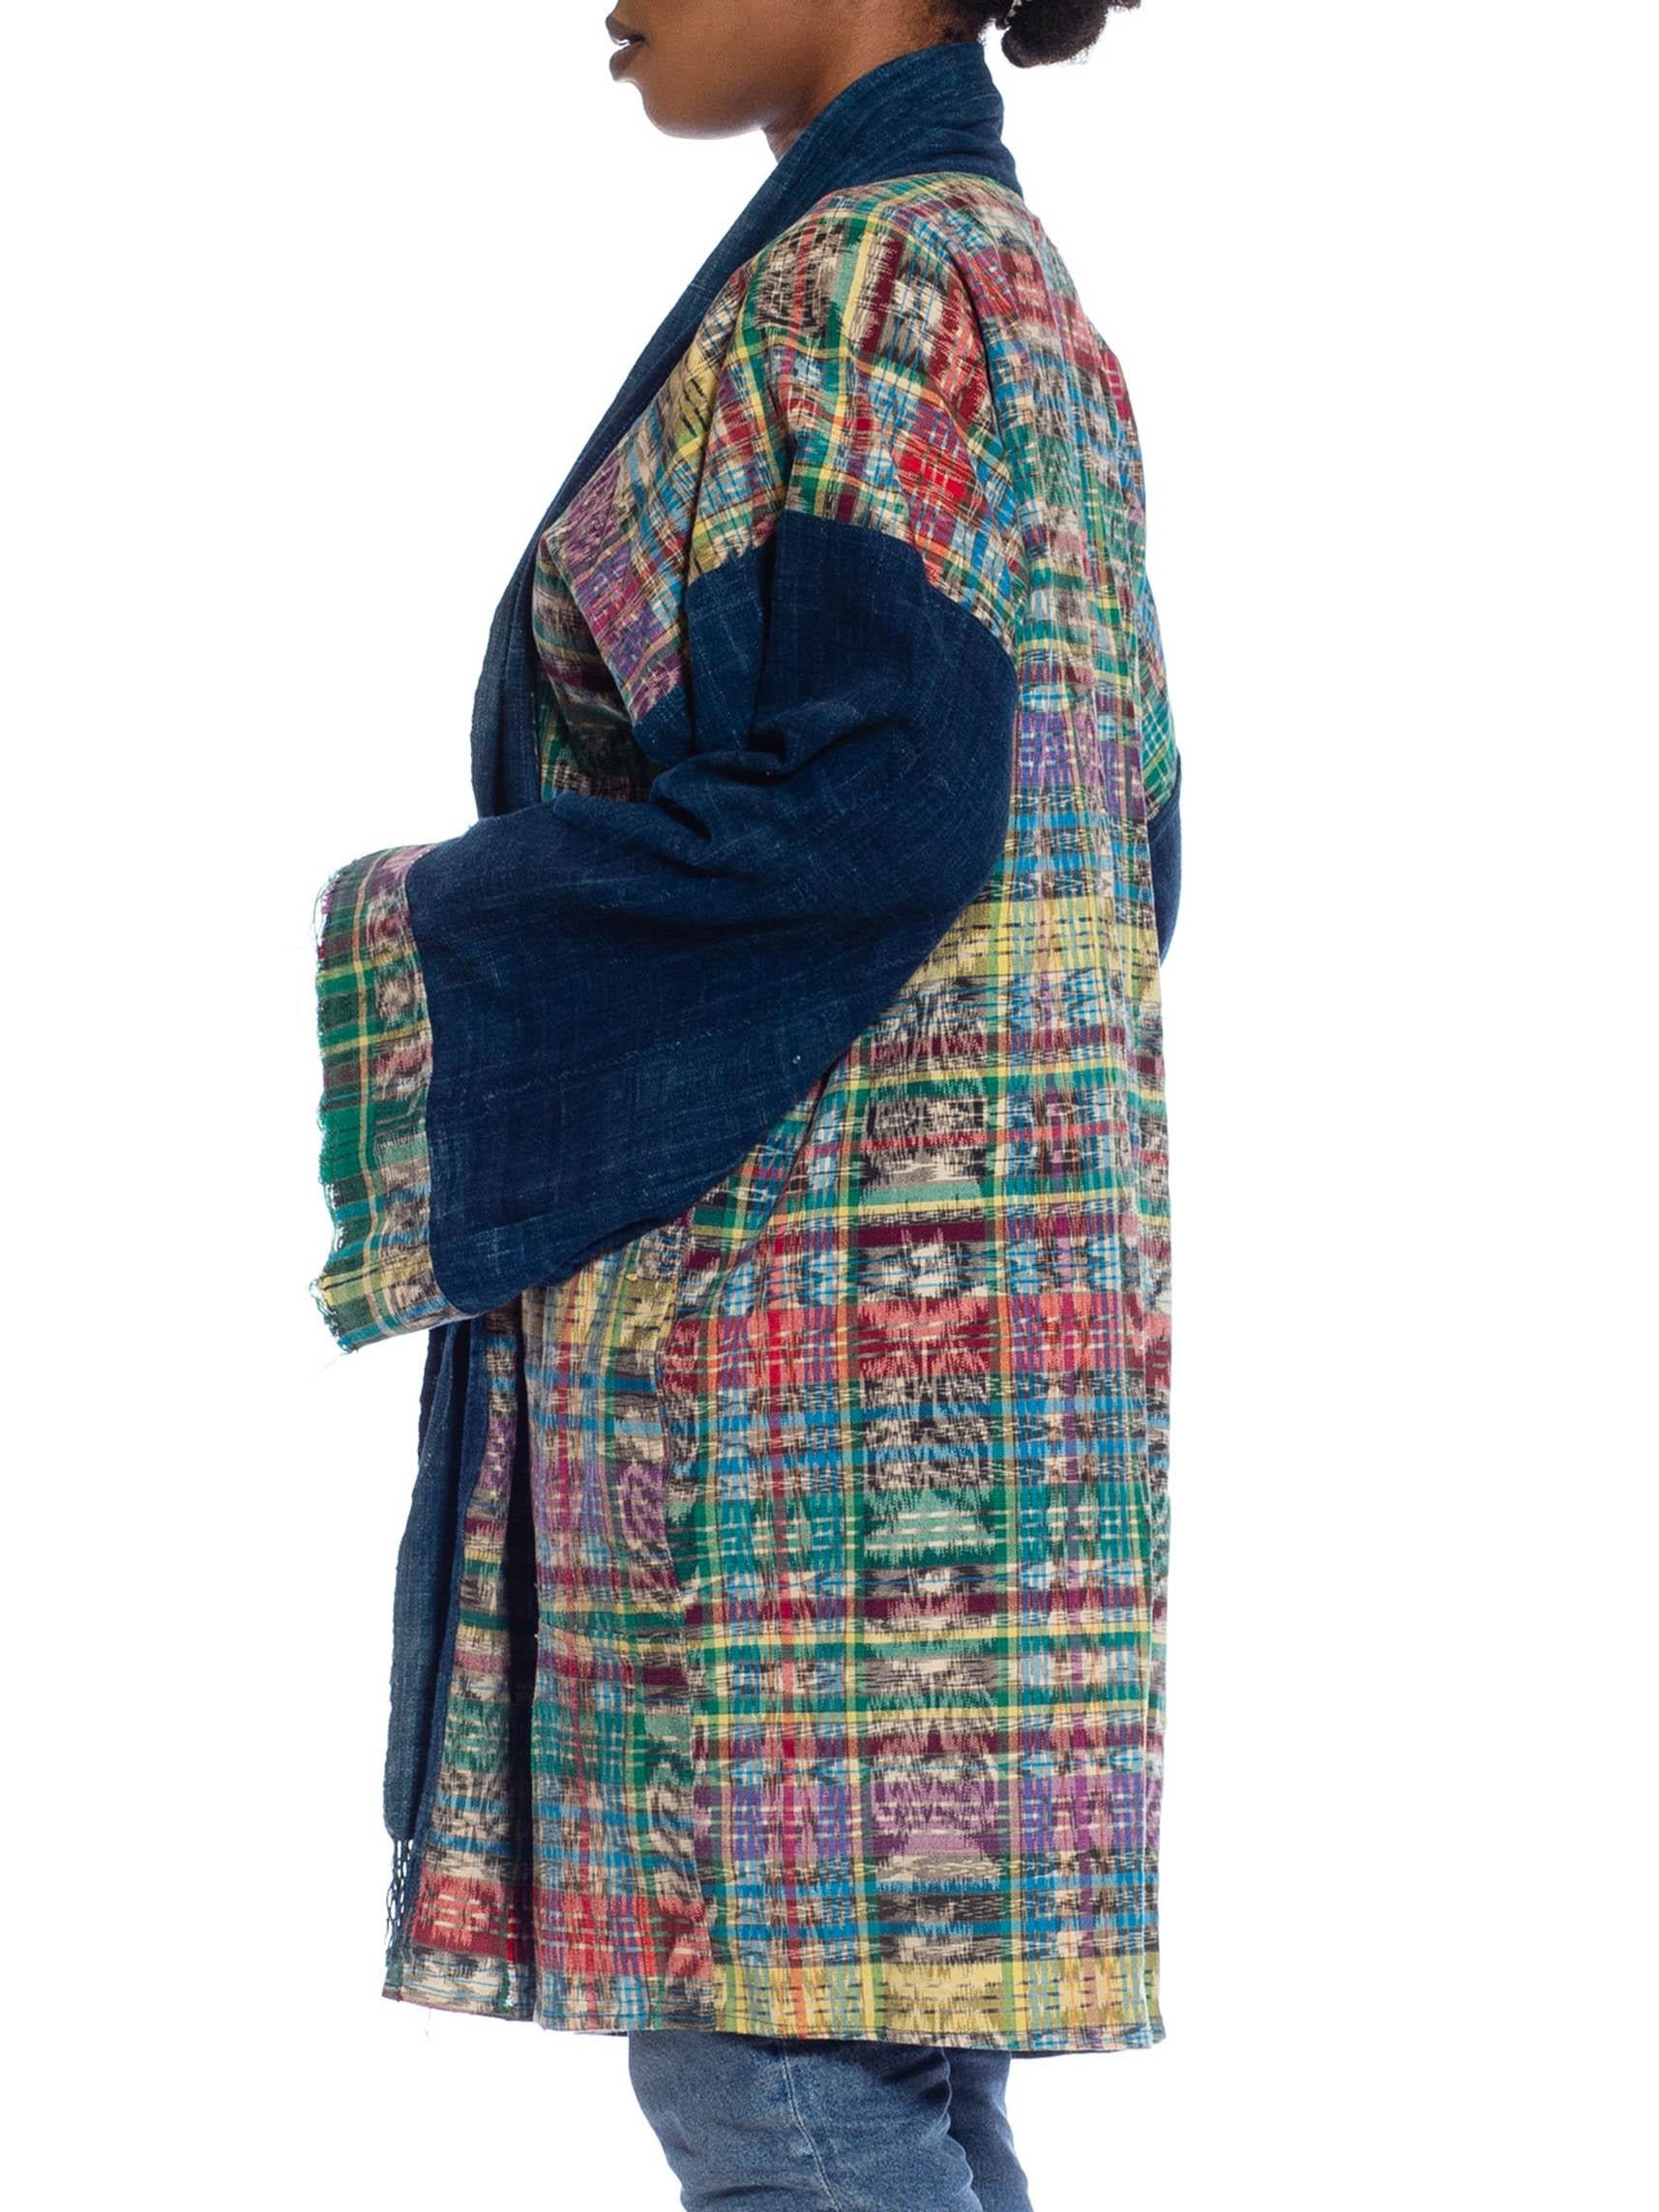 MORPHEW COLLECTION Navy Blue Multi African Cotton & Hand-Woven Guatemalan Ikat  For Sale 3